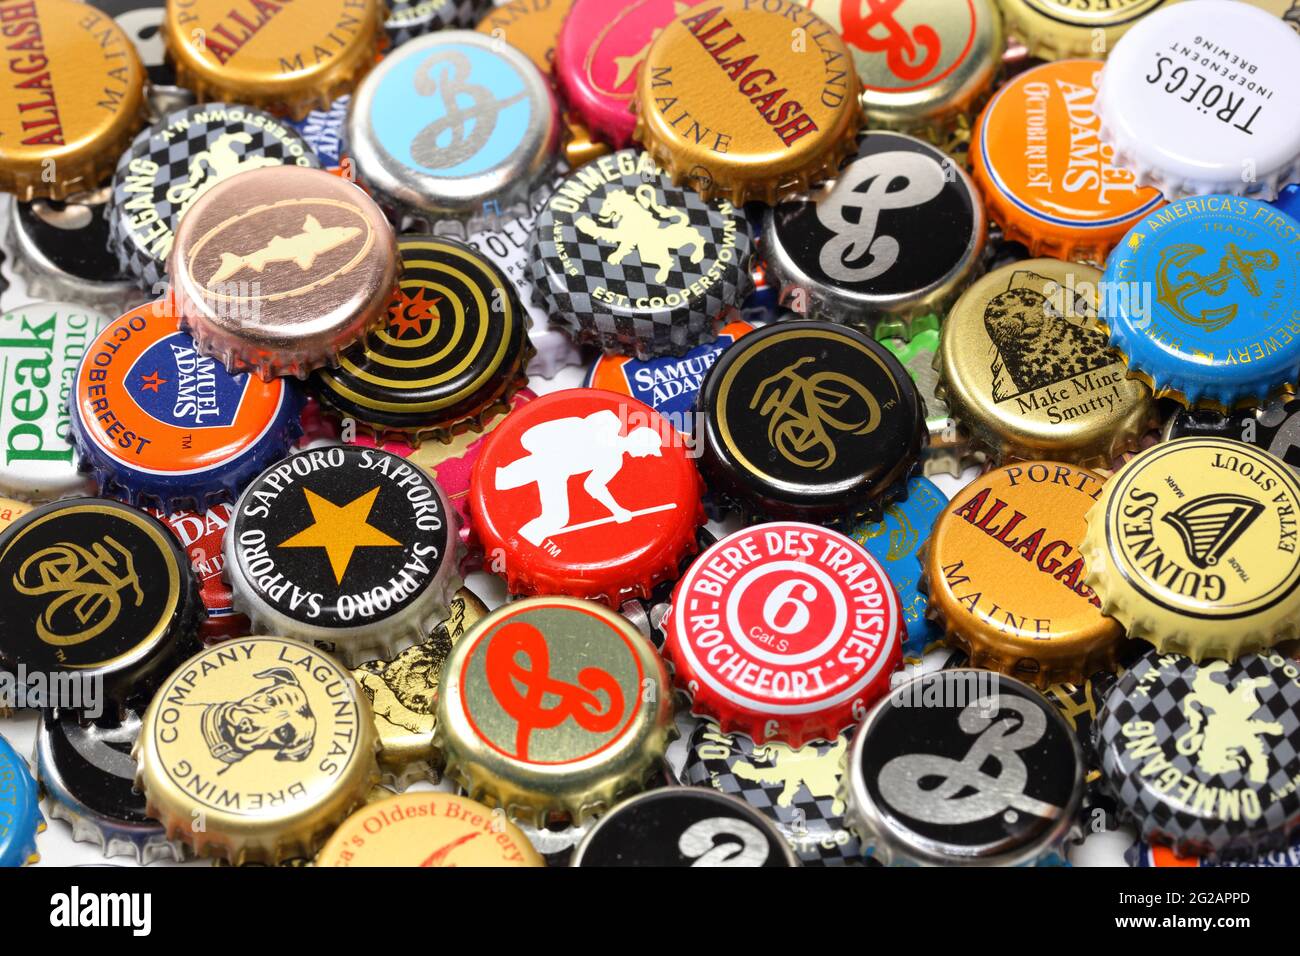 A colorful, and eclectic collection of bottle caps Stock Photo